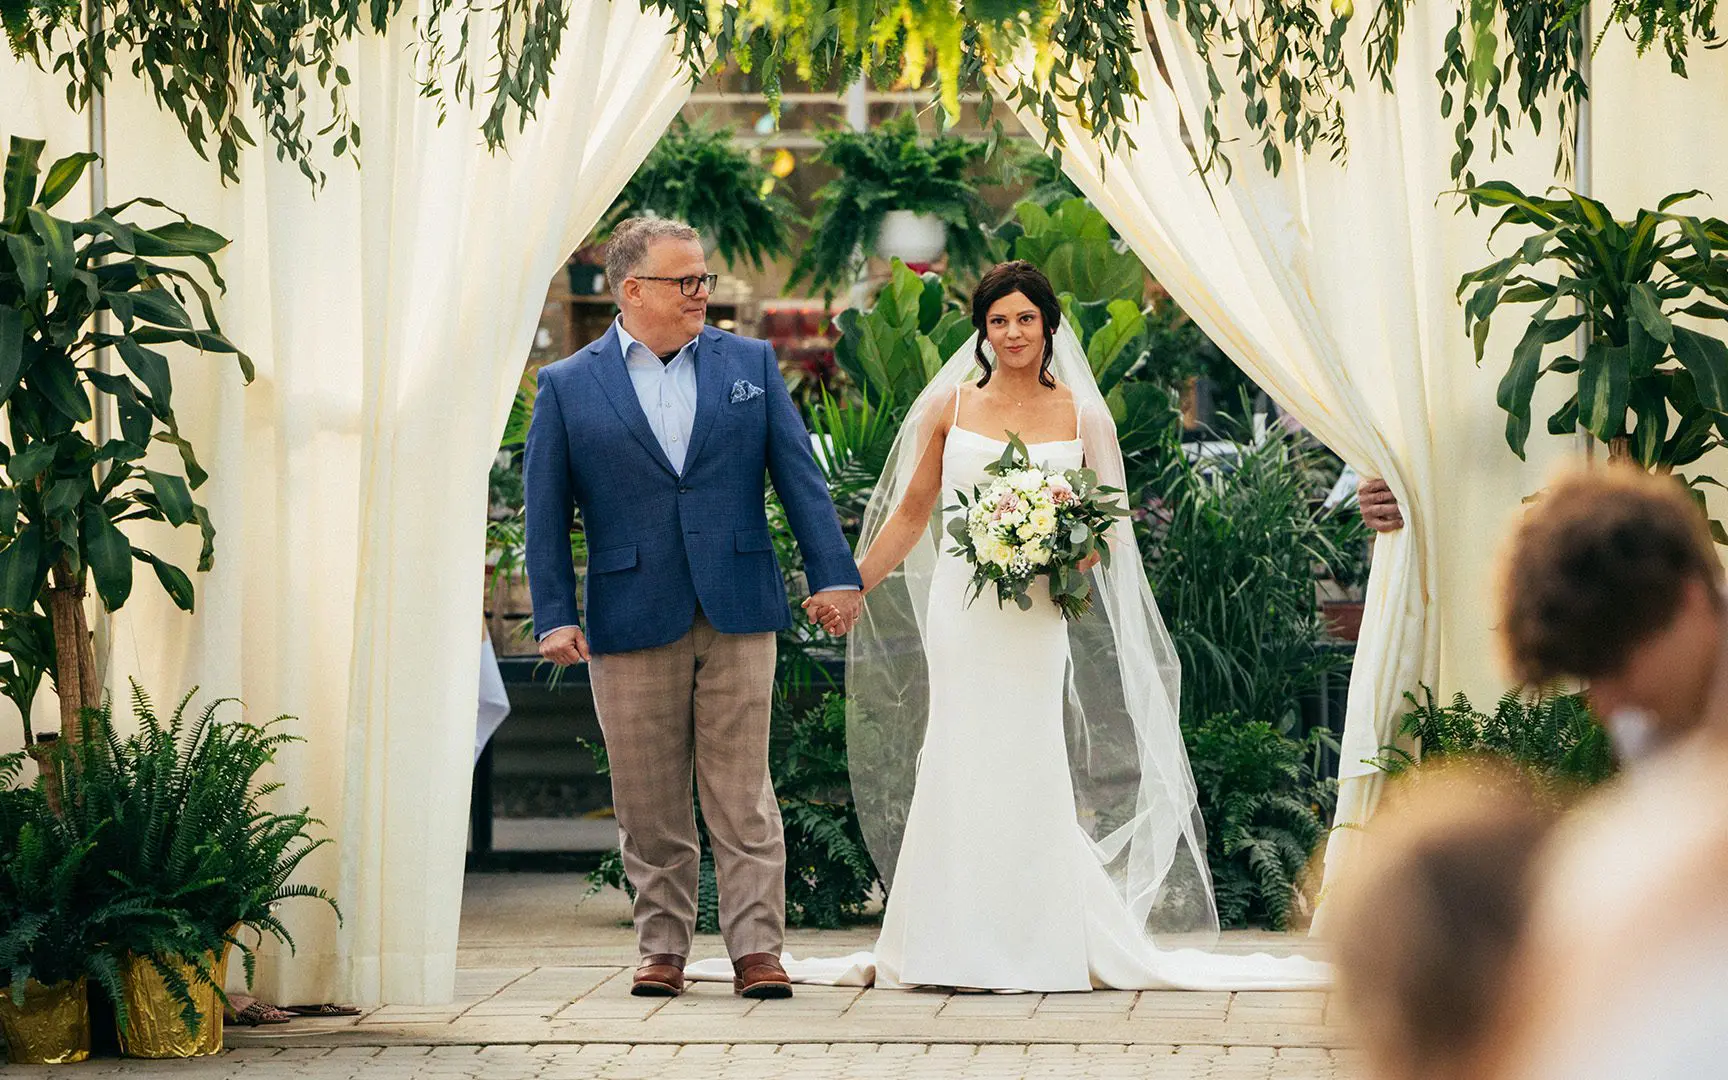 A bride in a white dress and her father walking down the aisle, surrounded by plants and draped curtains.